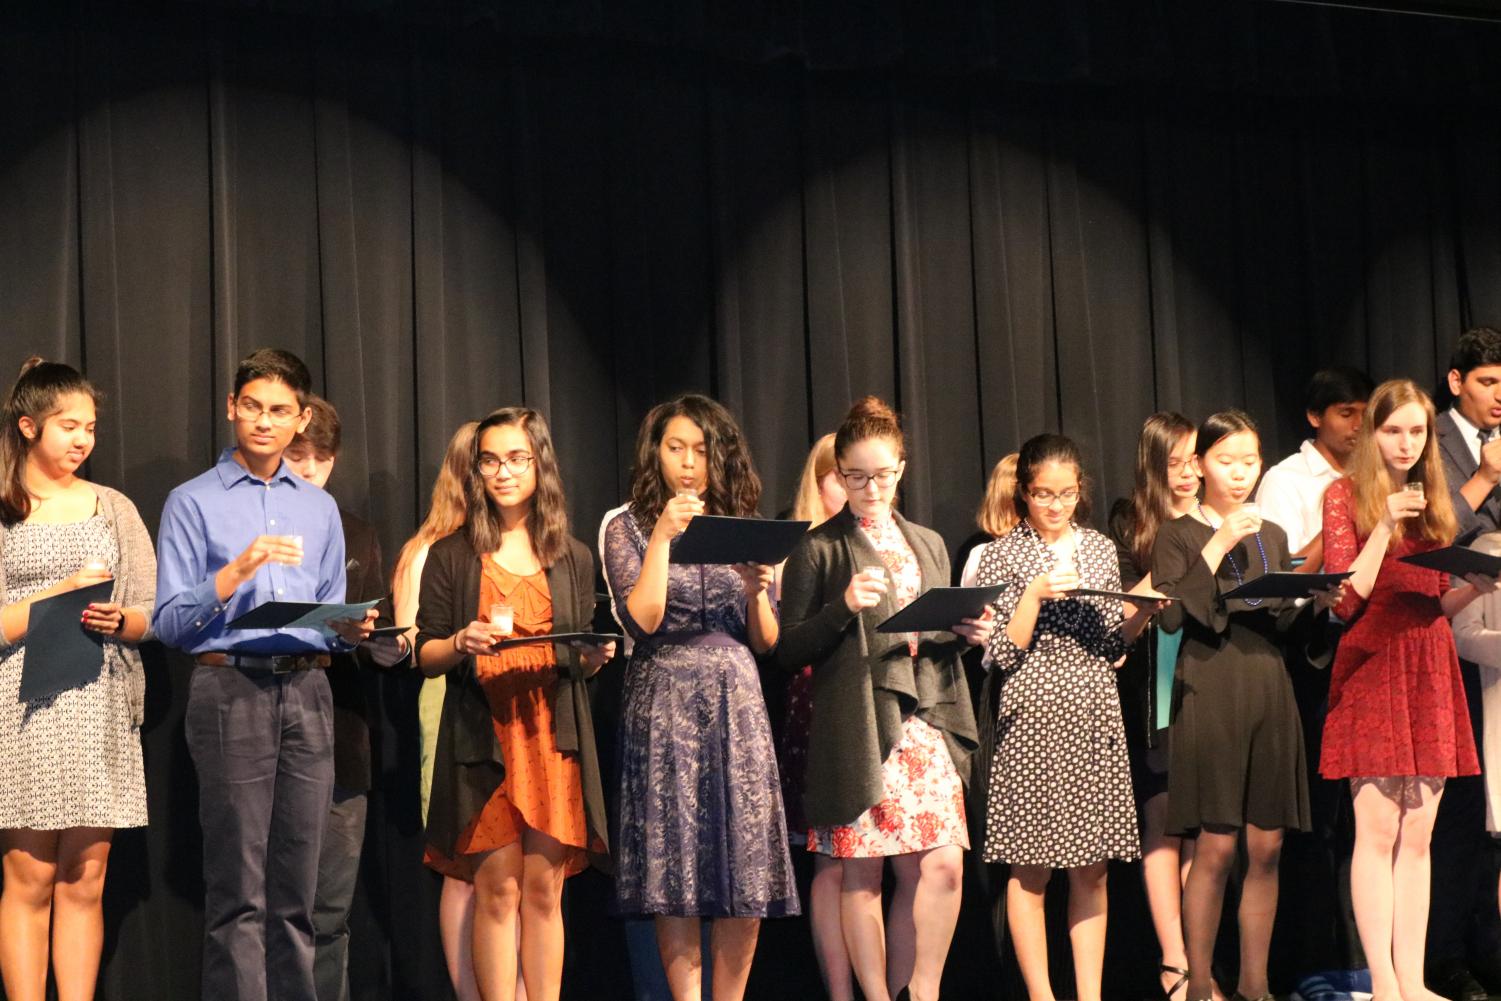 National+French+Honor+Society+Inducts+New+Members